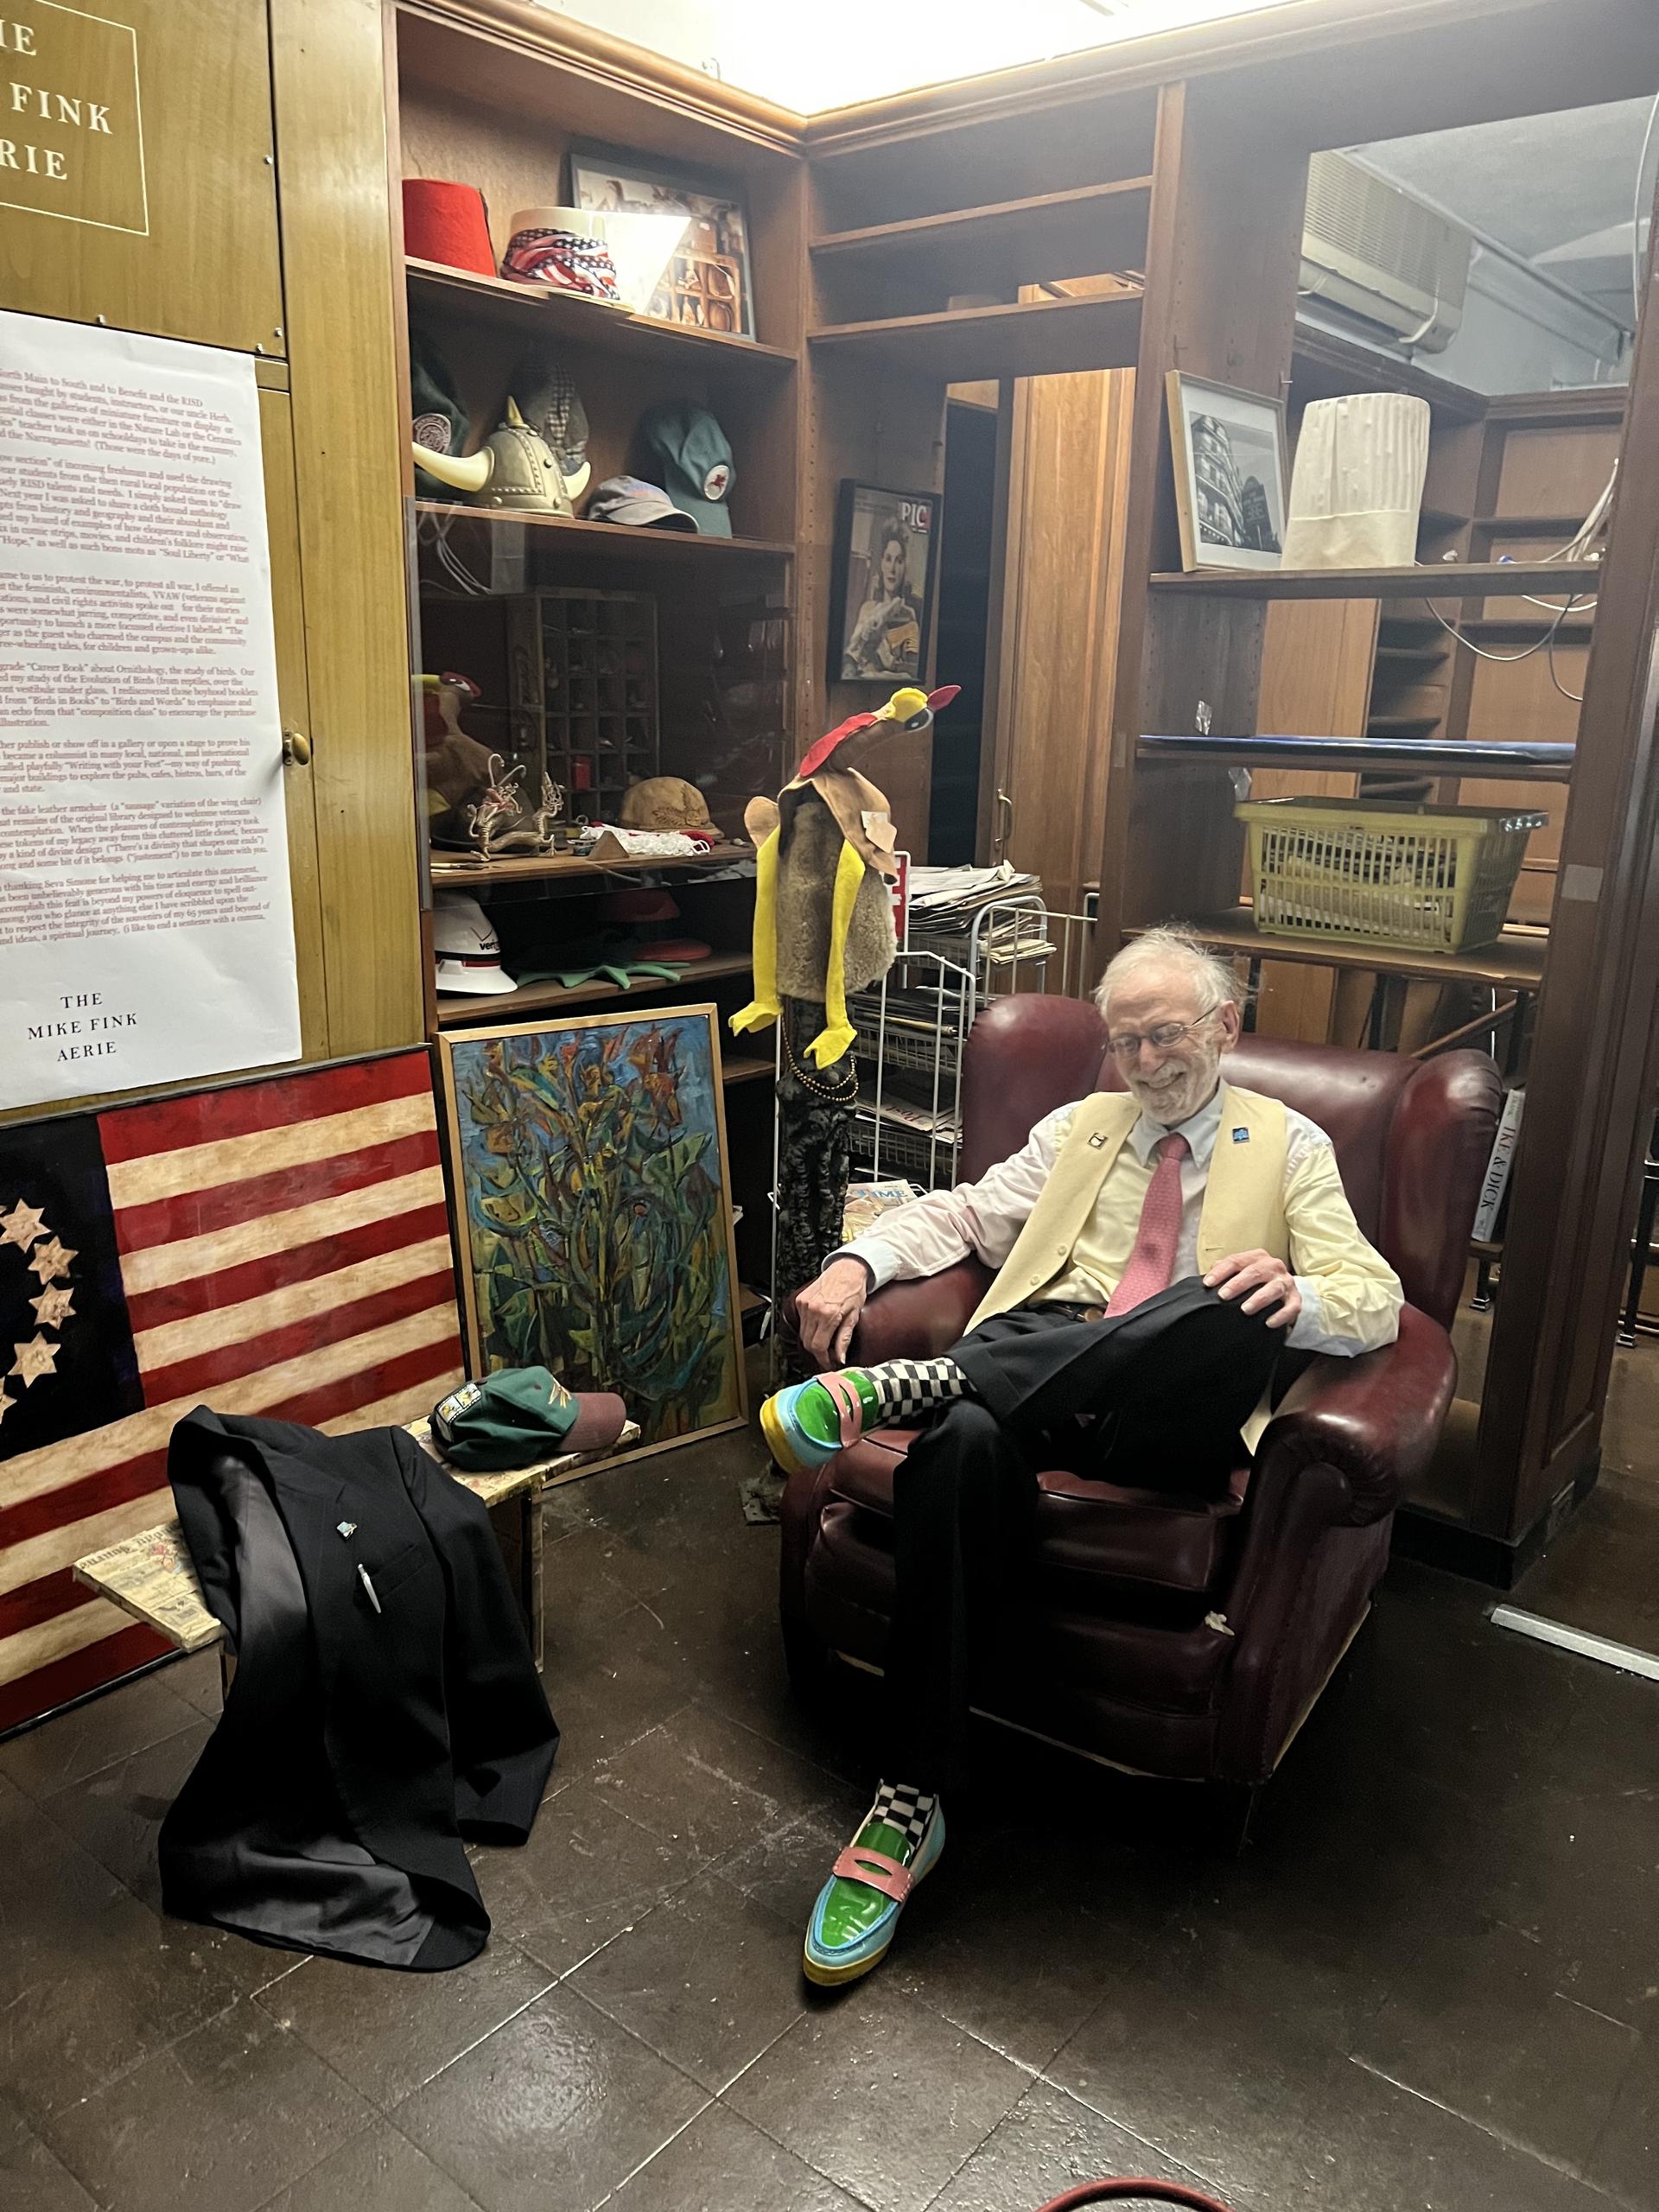 Mike Fink (pictured) gleefully enjoying the space we put together (The Mike Fink Aerie). A nod to one of Mike’s earlier projects during his 60 year tenure at RISD, which was a public library in the Old Library at RISD.